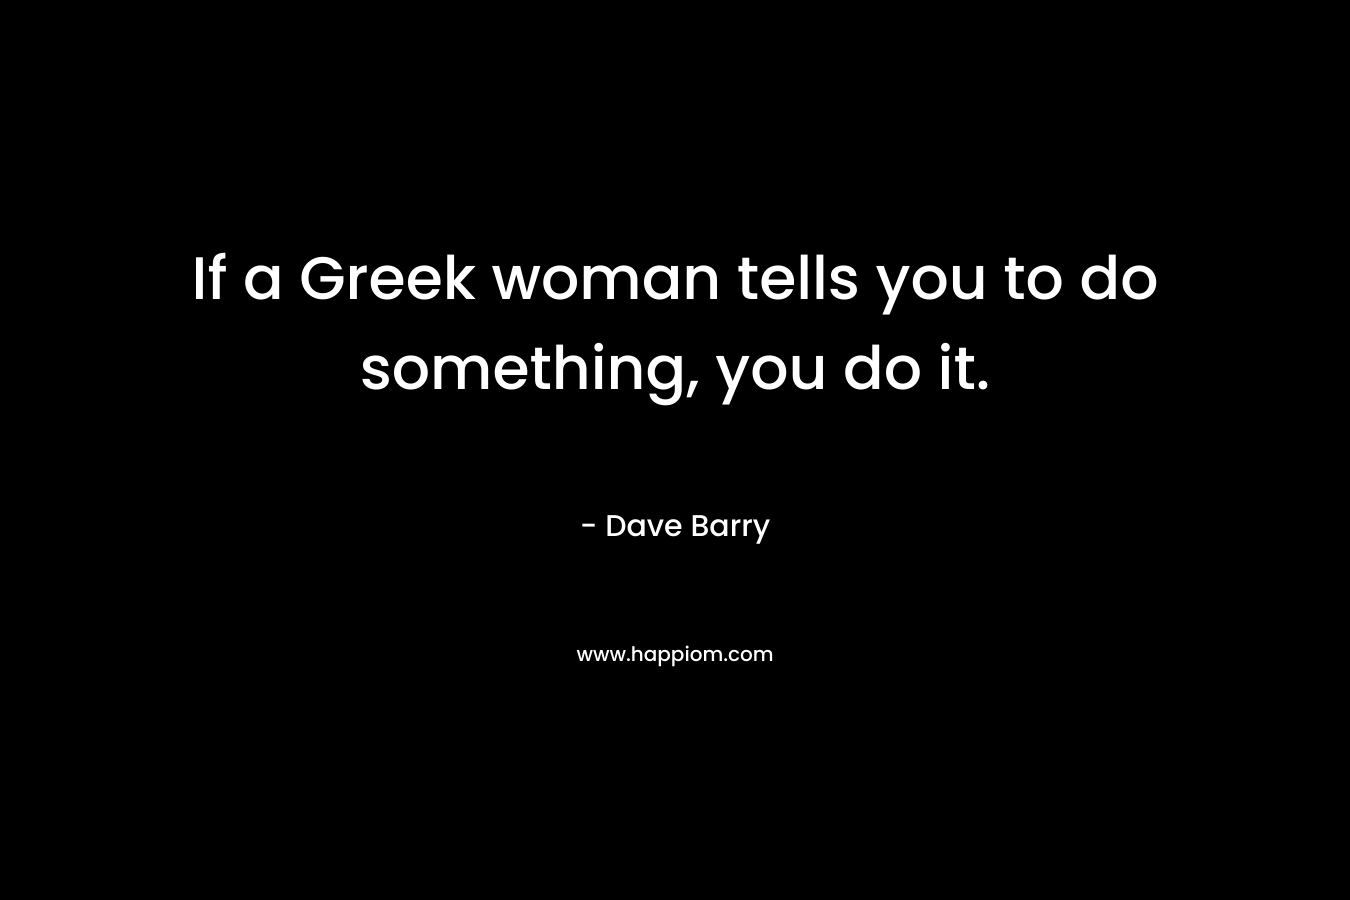 If a Greek woman tells you to do something, you do it. – Dave Barry